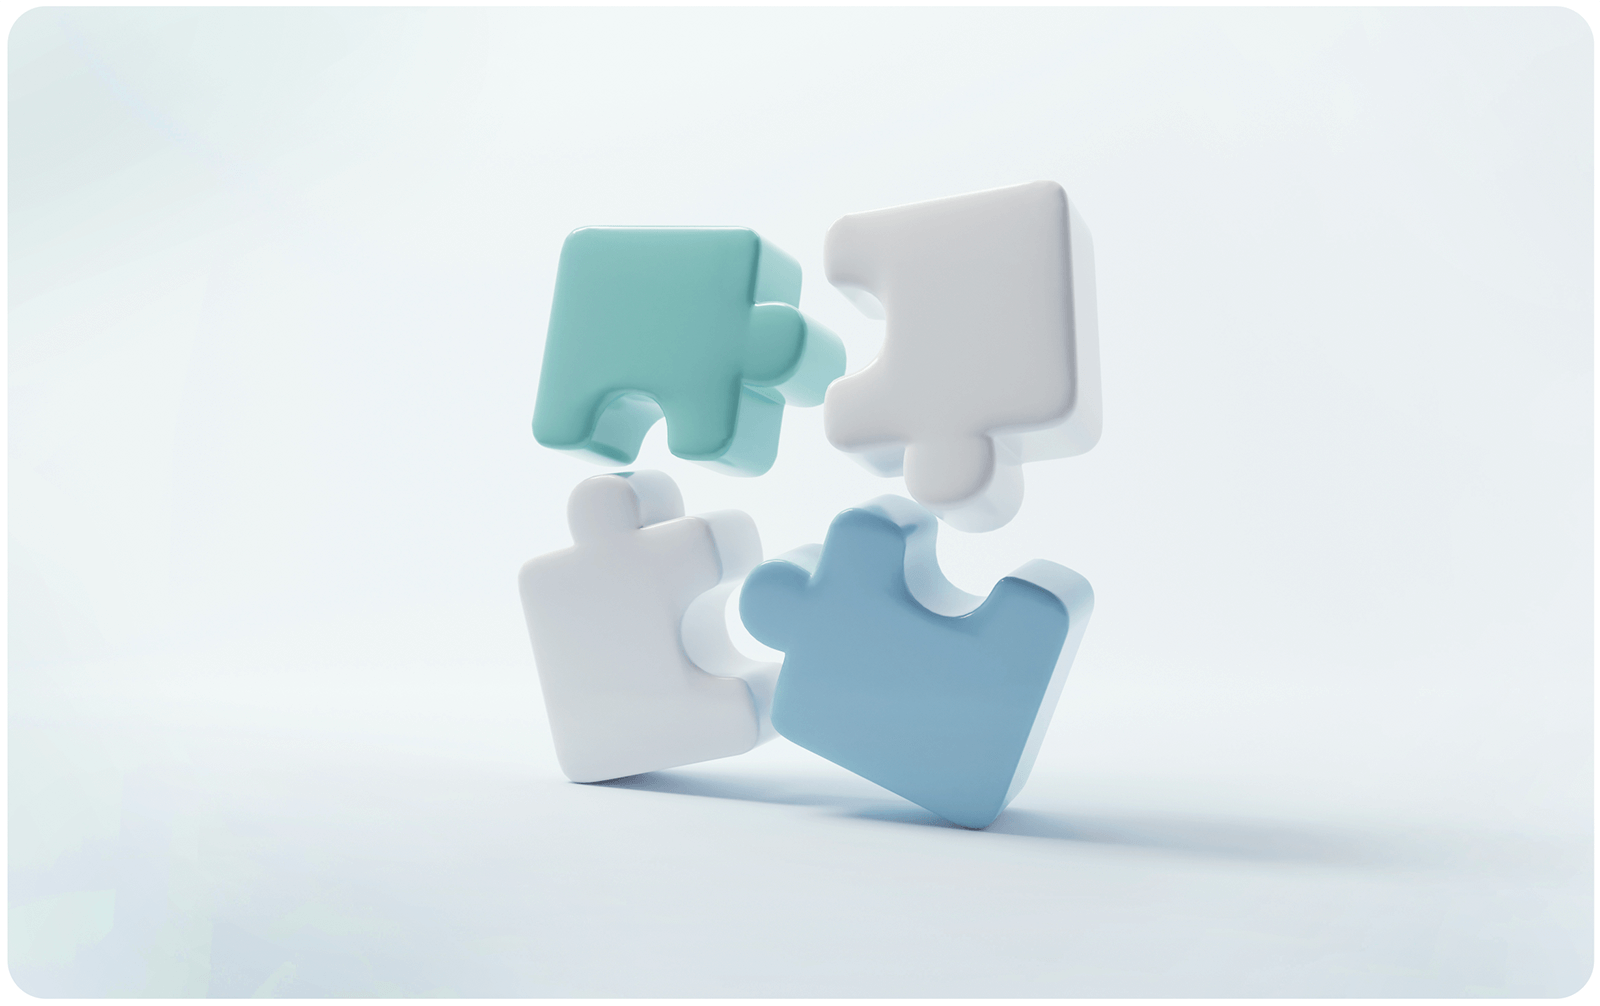 Cartoonish, 3D rendering of four puzzle pieces falling into place.